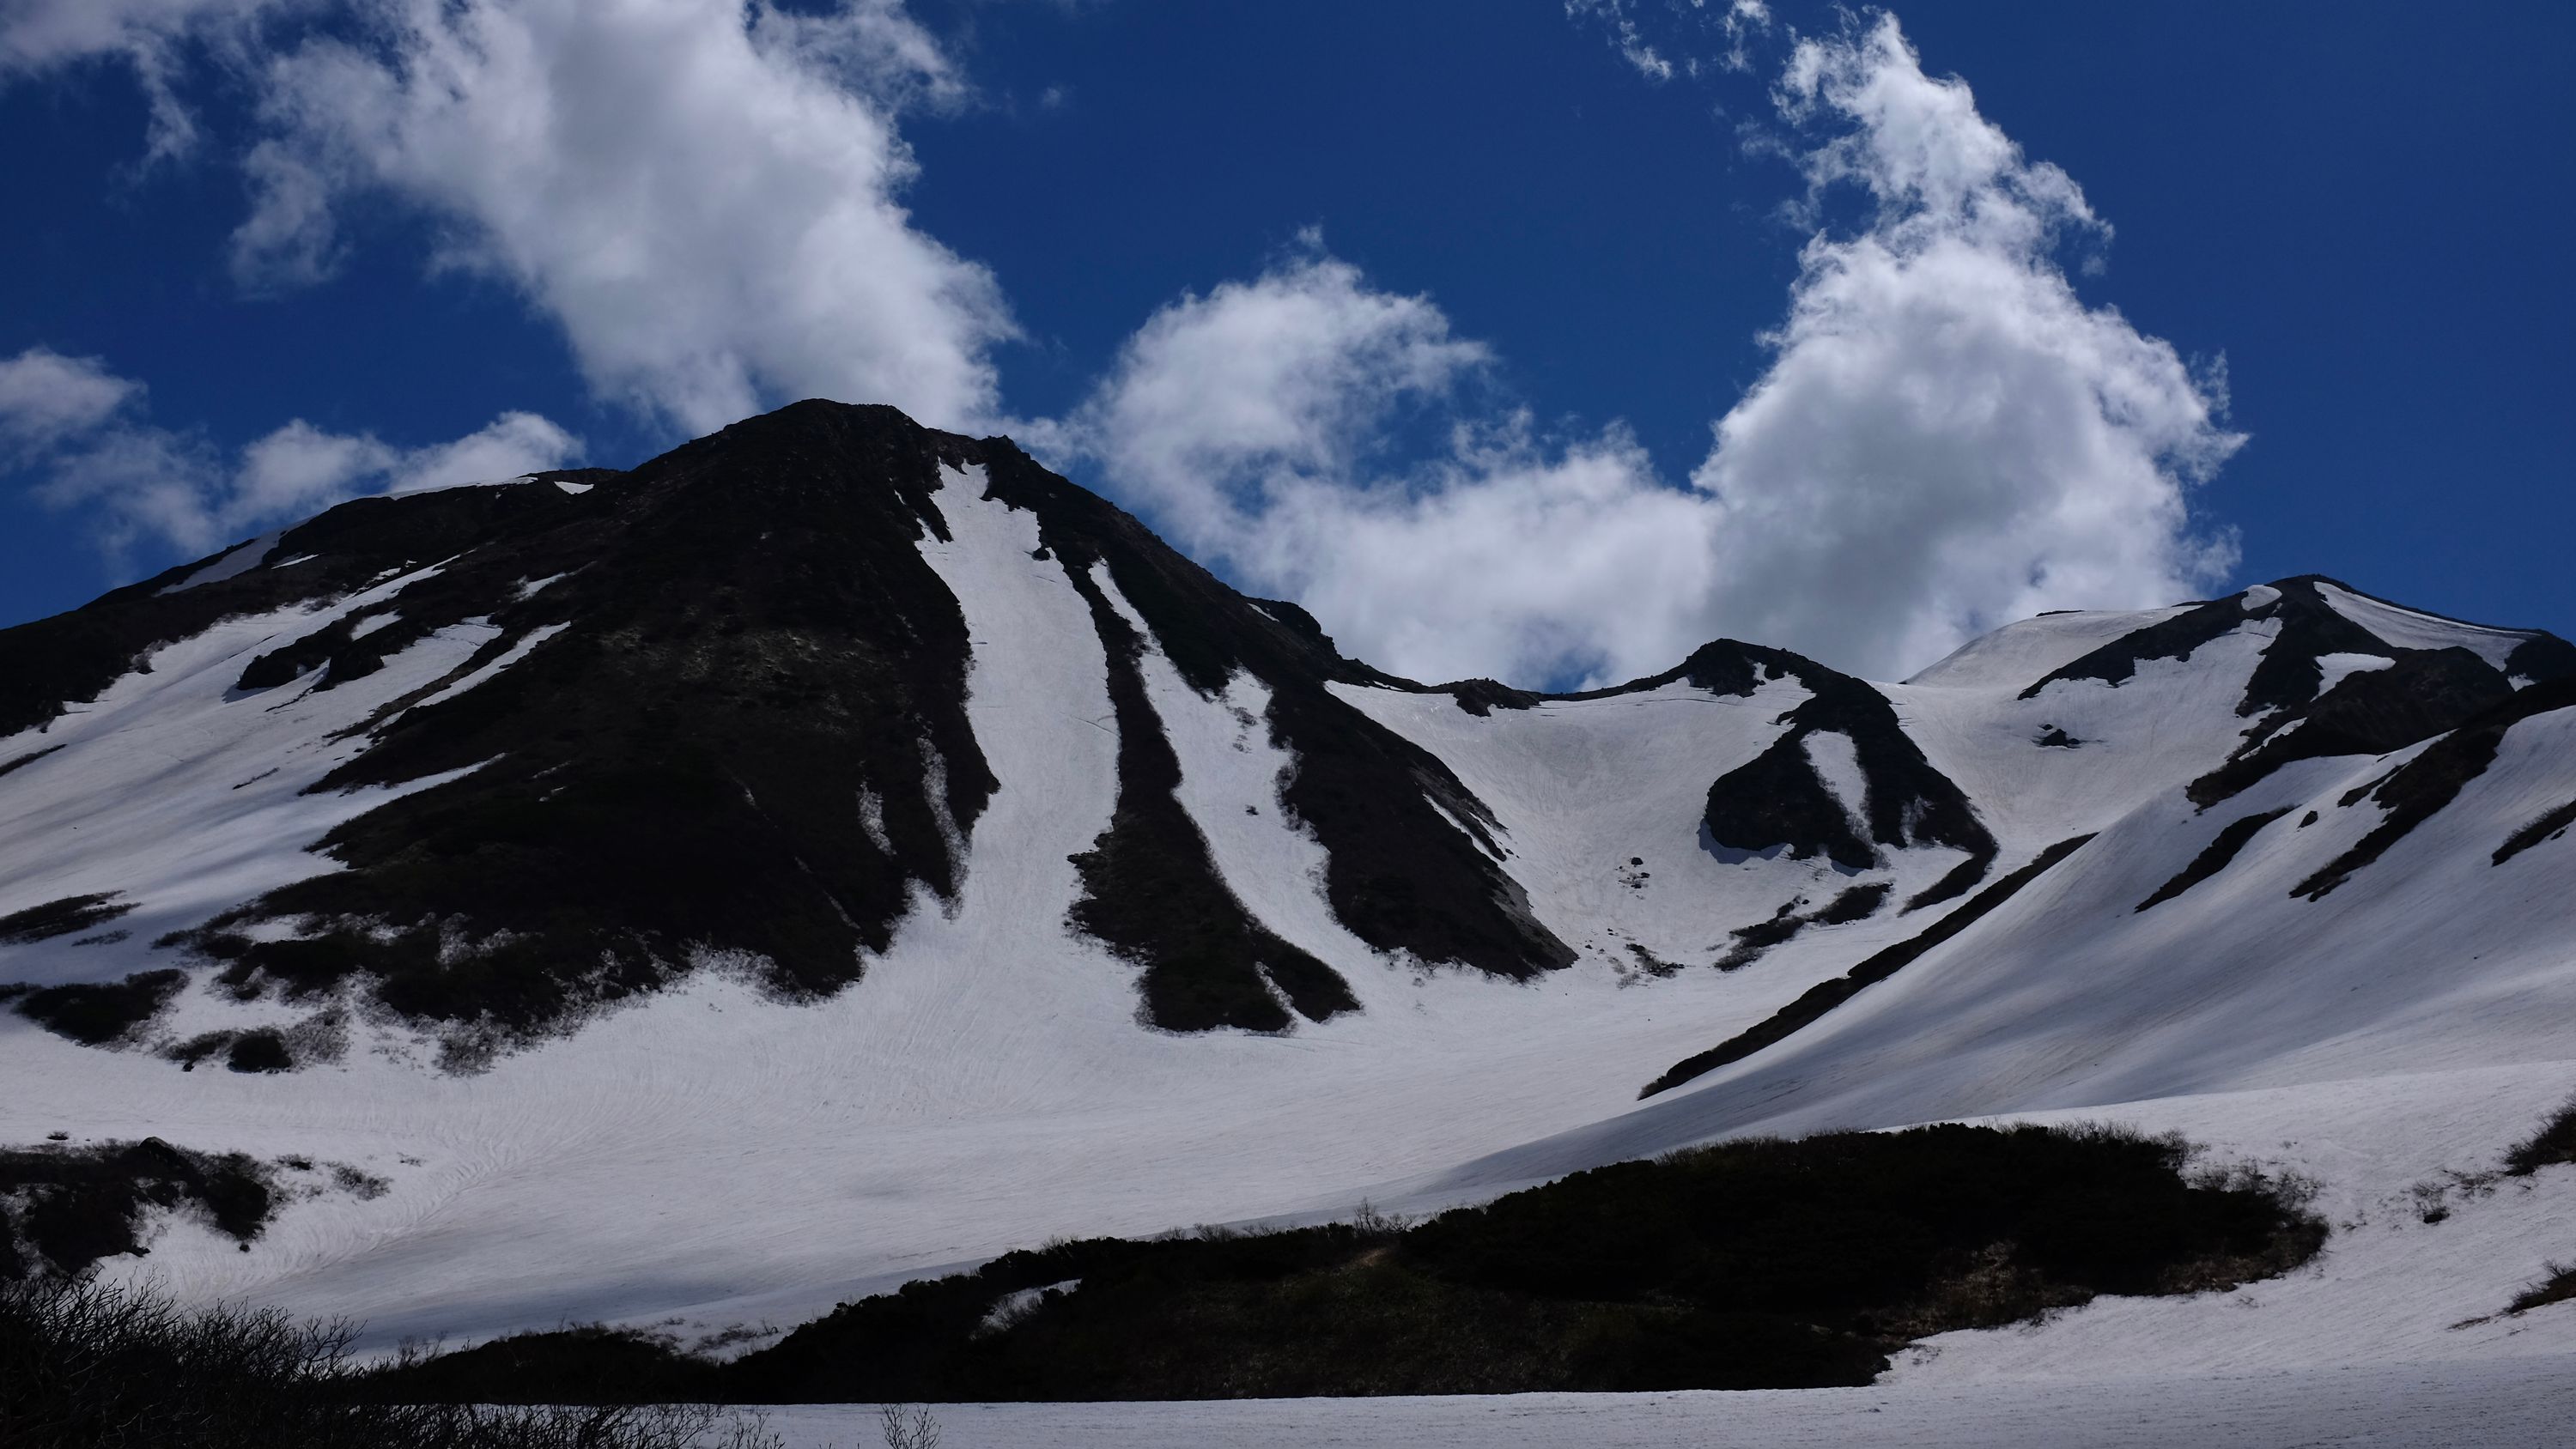 Looking back on the summit peaks of Hakusan, mostly covered in snow.